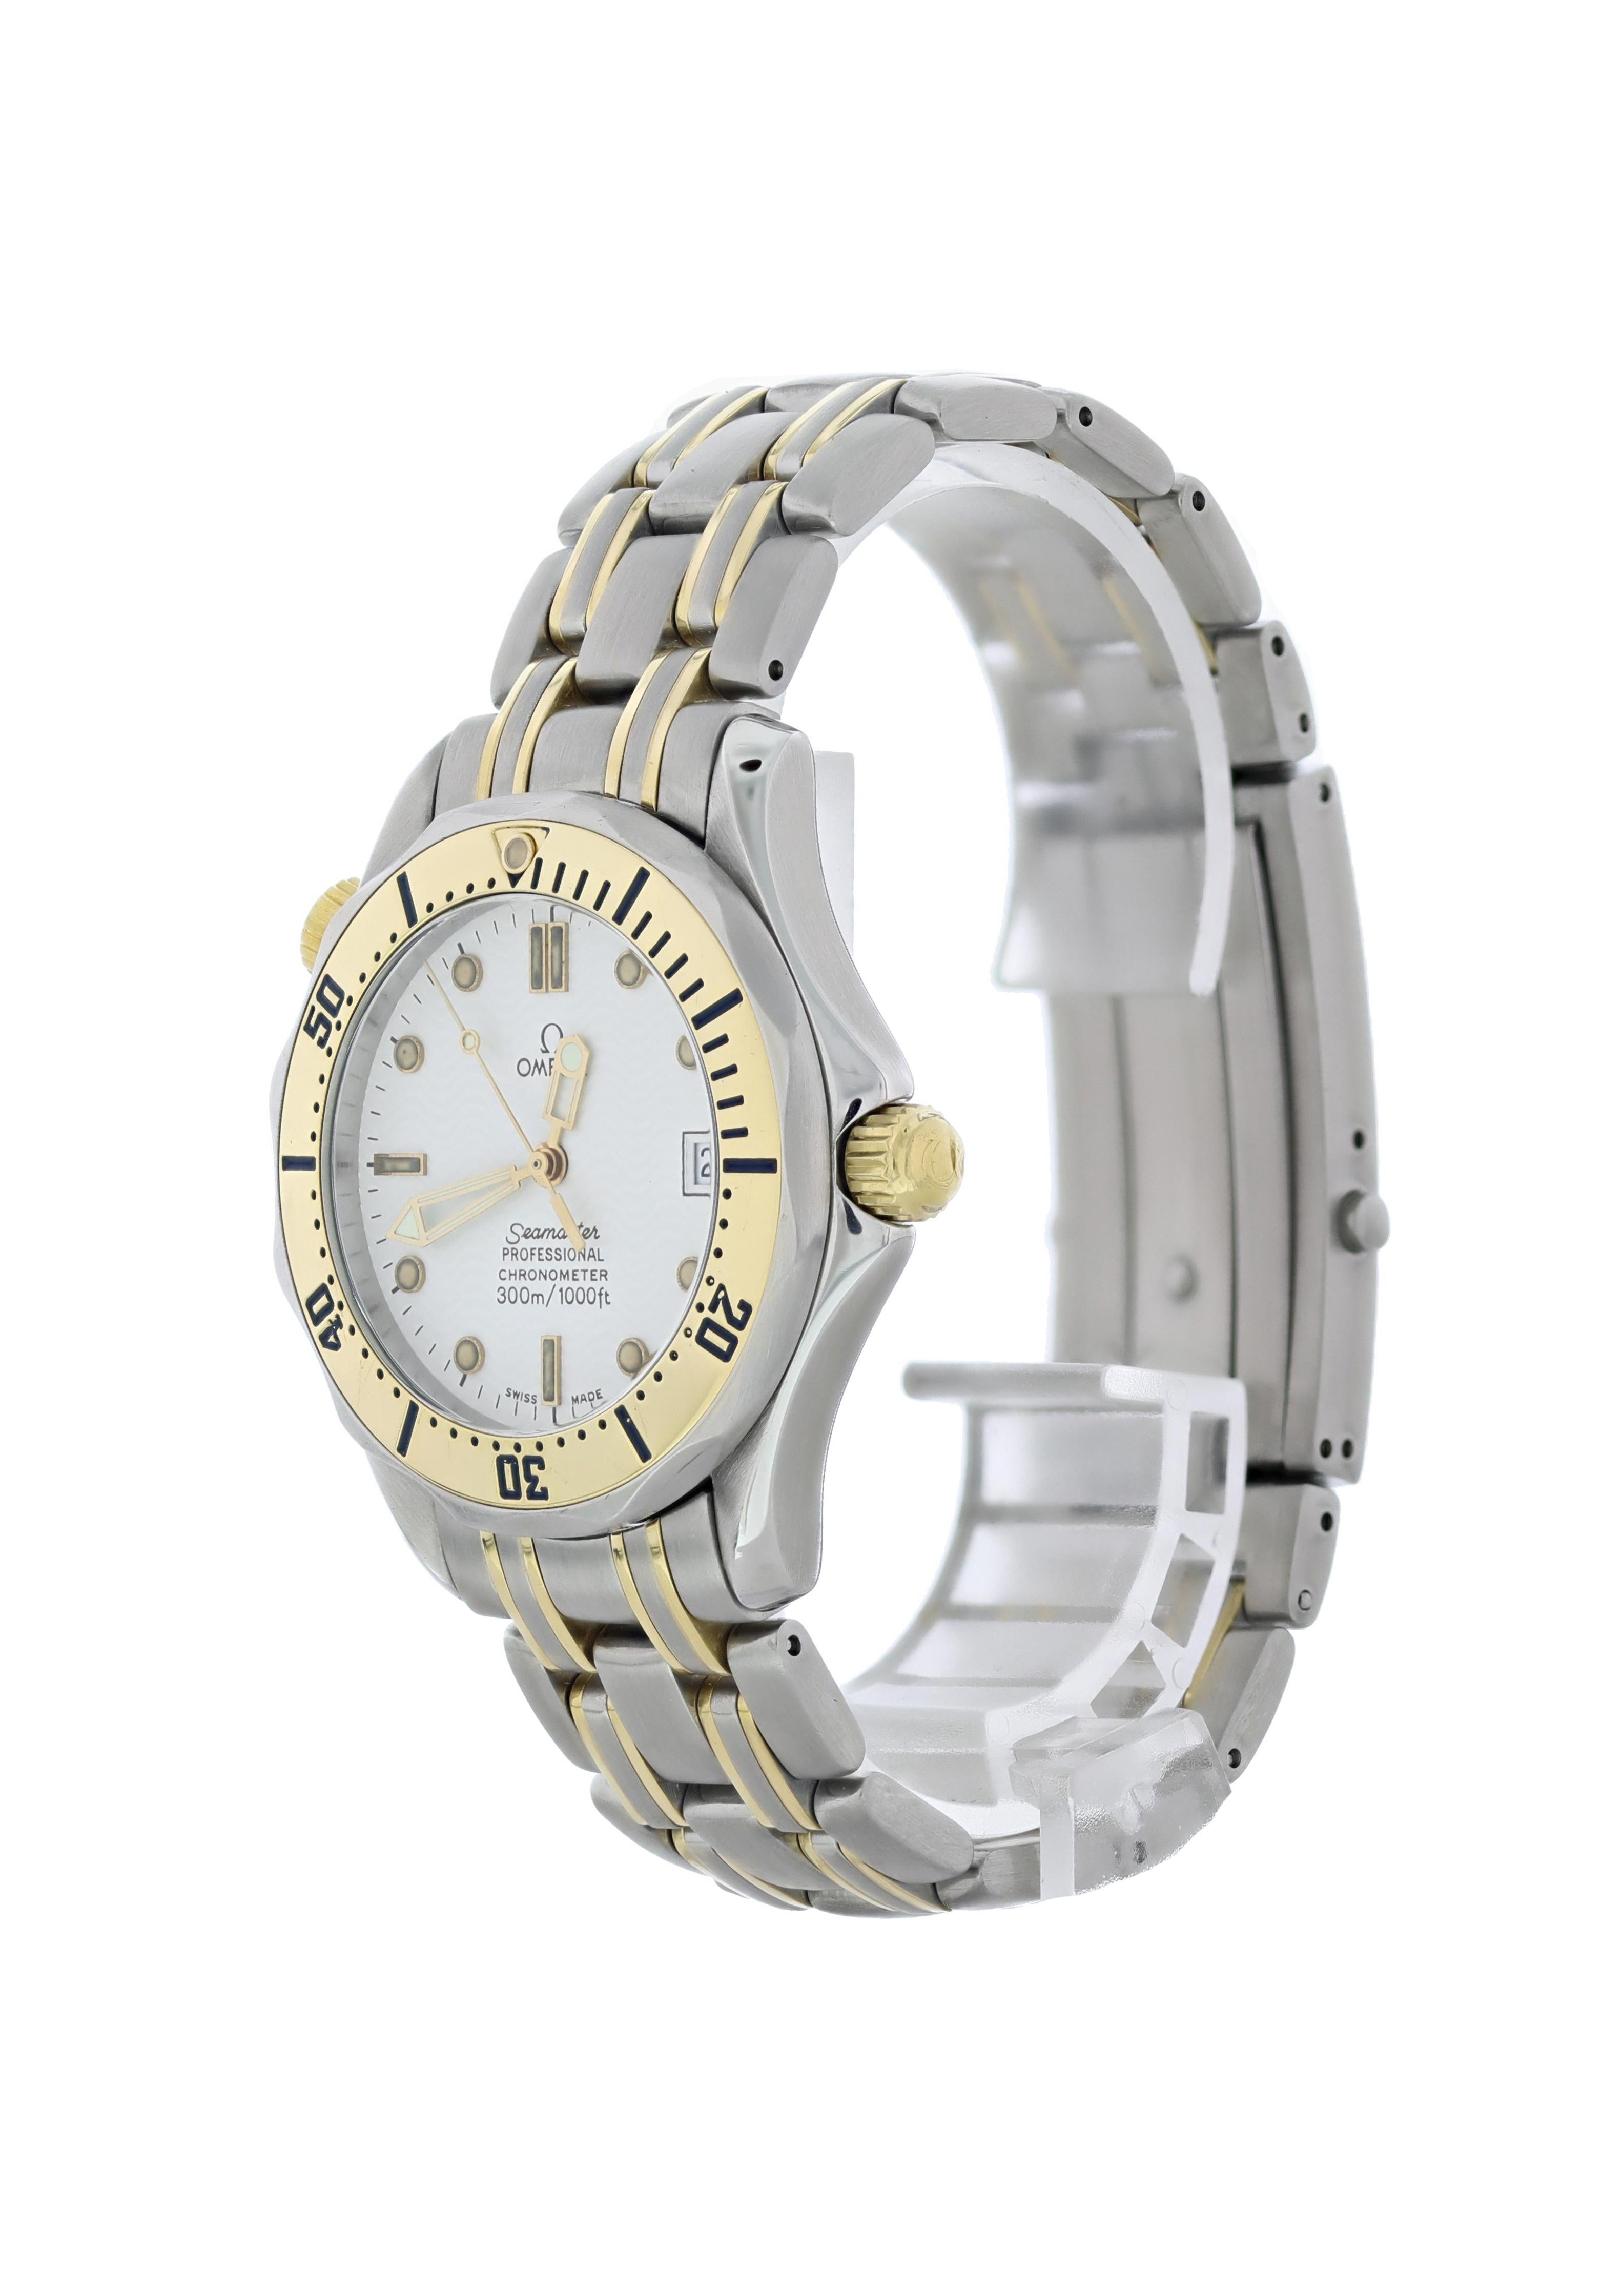 Omega Seamaster Professional 236.22.000 Midsize Watch. 36mm stainless steel case. Unidirectional rotating bezel with 18k Yellow gold bezel insert. White wave dial with gold luminous hands and markers. Helium escape valve at the 10 o'clock position.